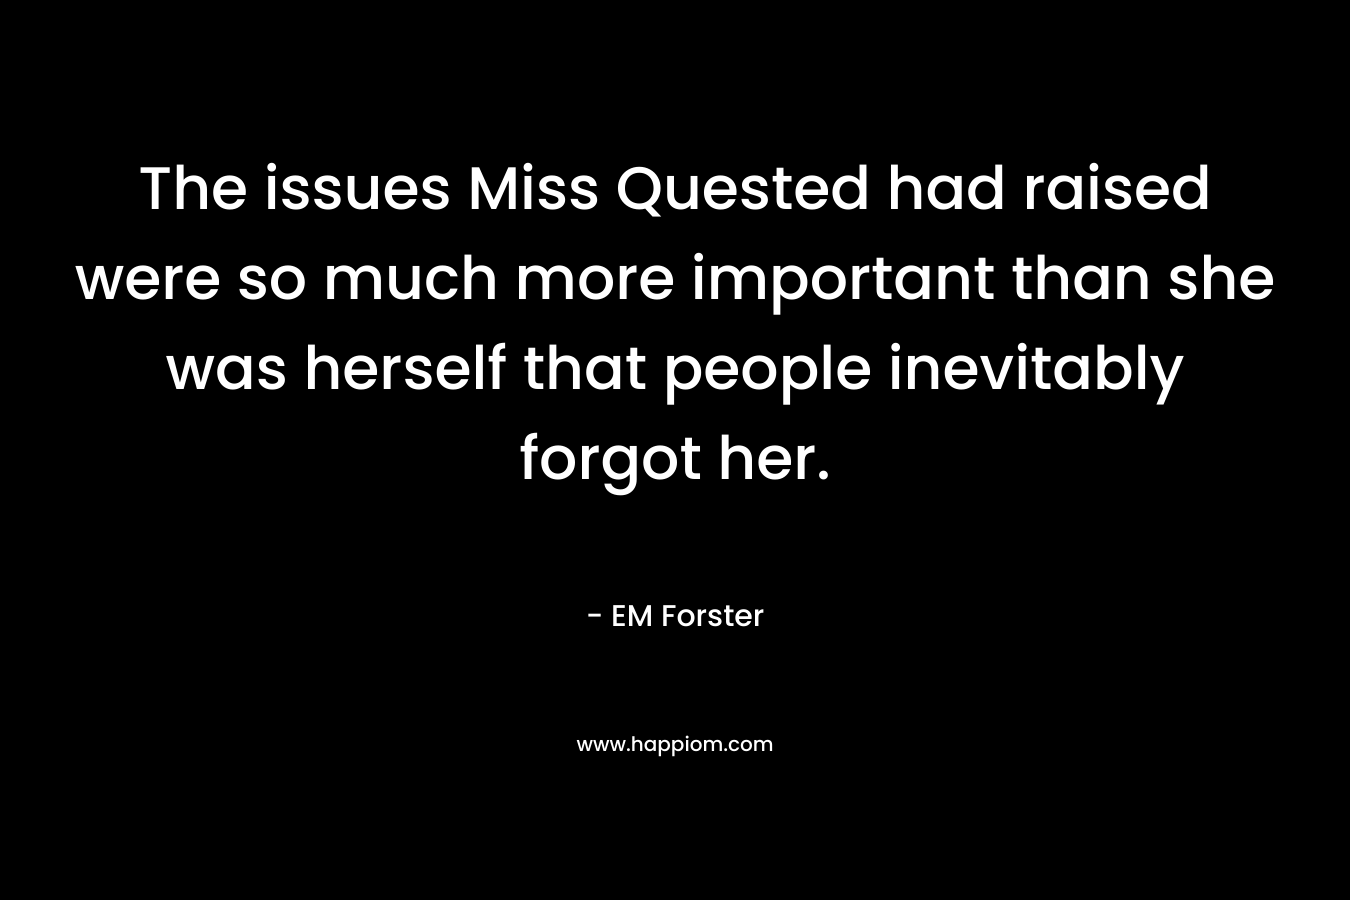 The issues Miss Quested had raised were so much more important than she was herself that people inevitably forgot her.